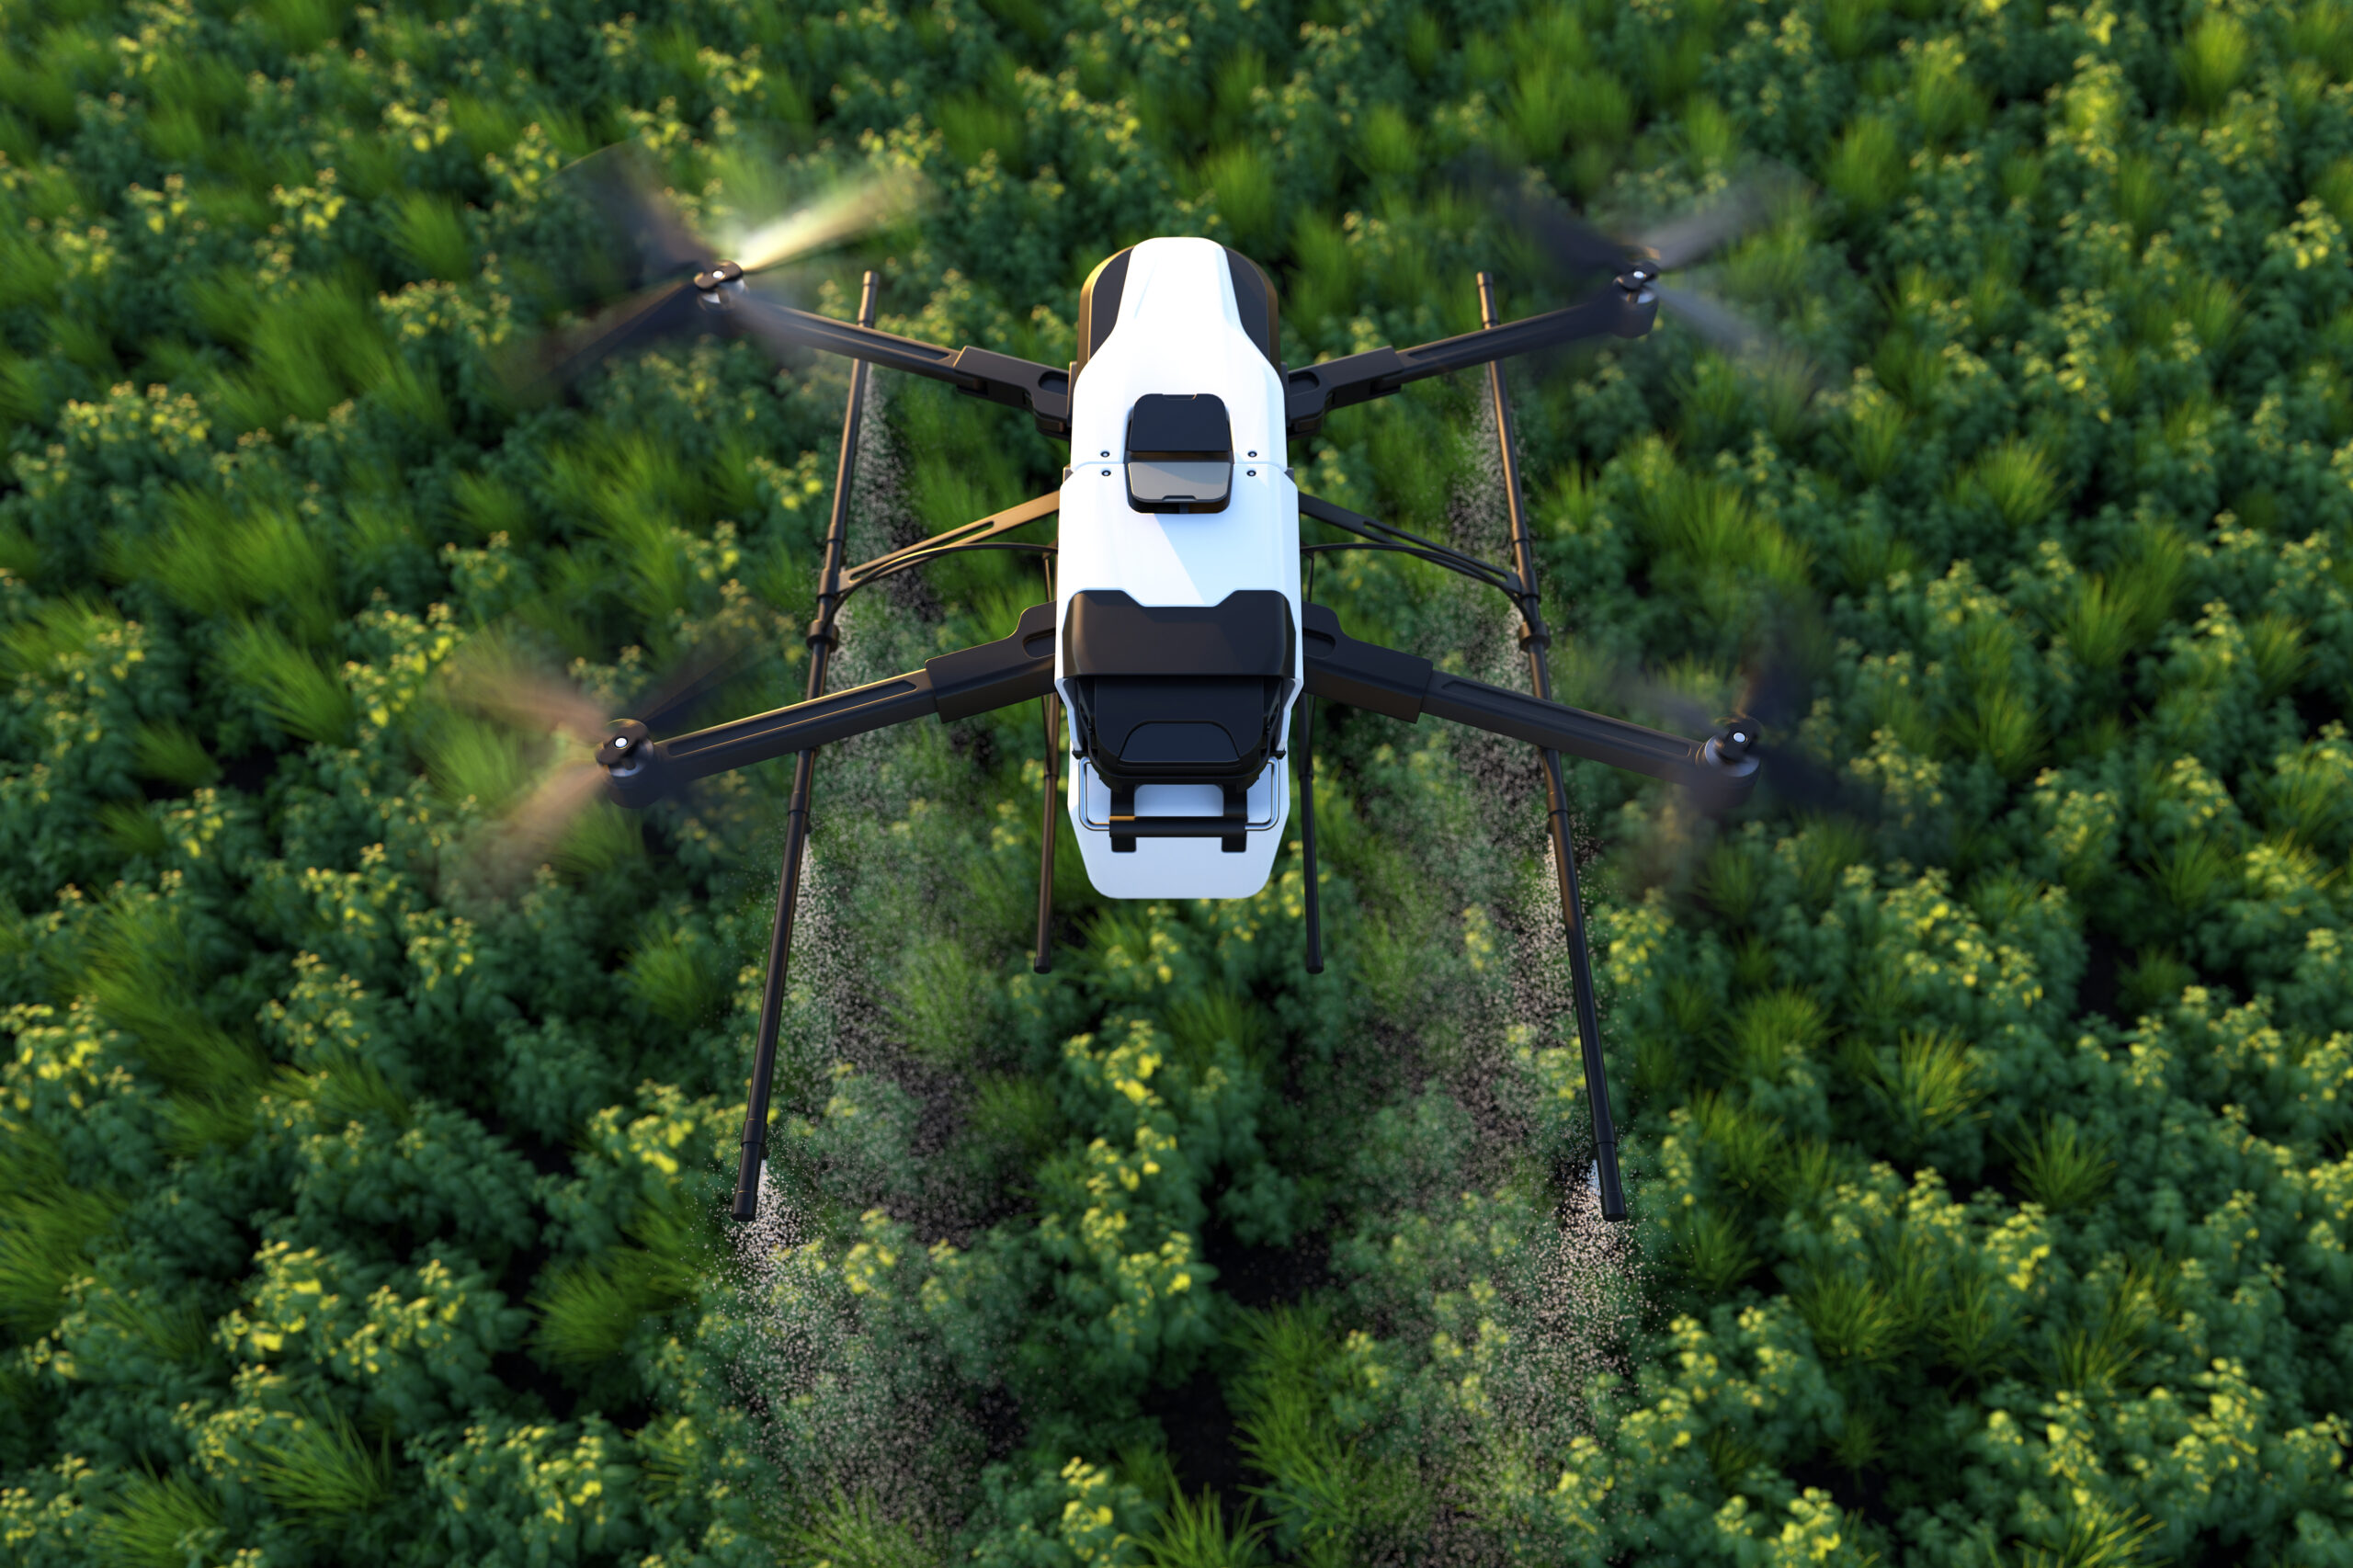 Drone spraying fertilizer on vegetable green plants, Agriculture technology, Farm automation. 3D illustration